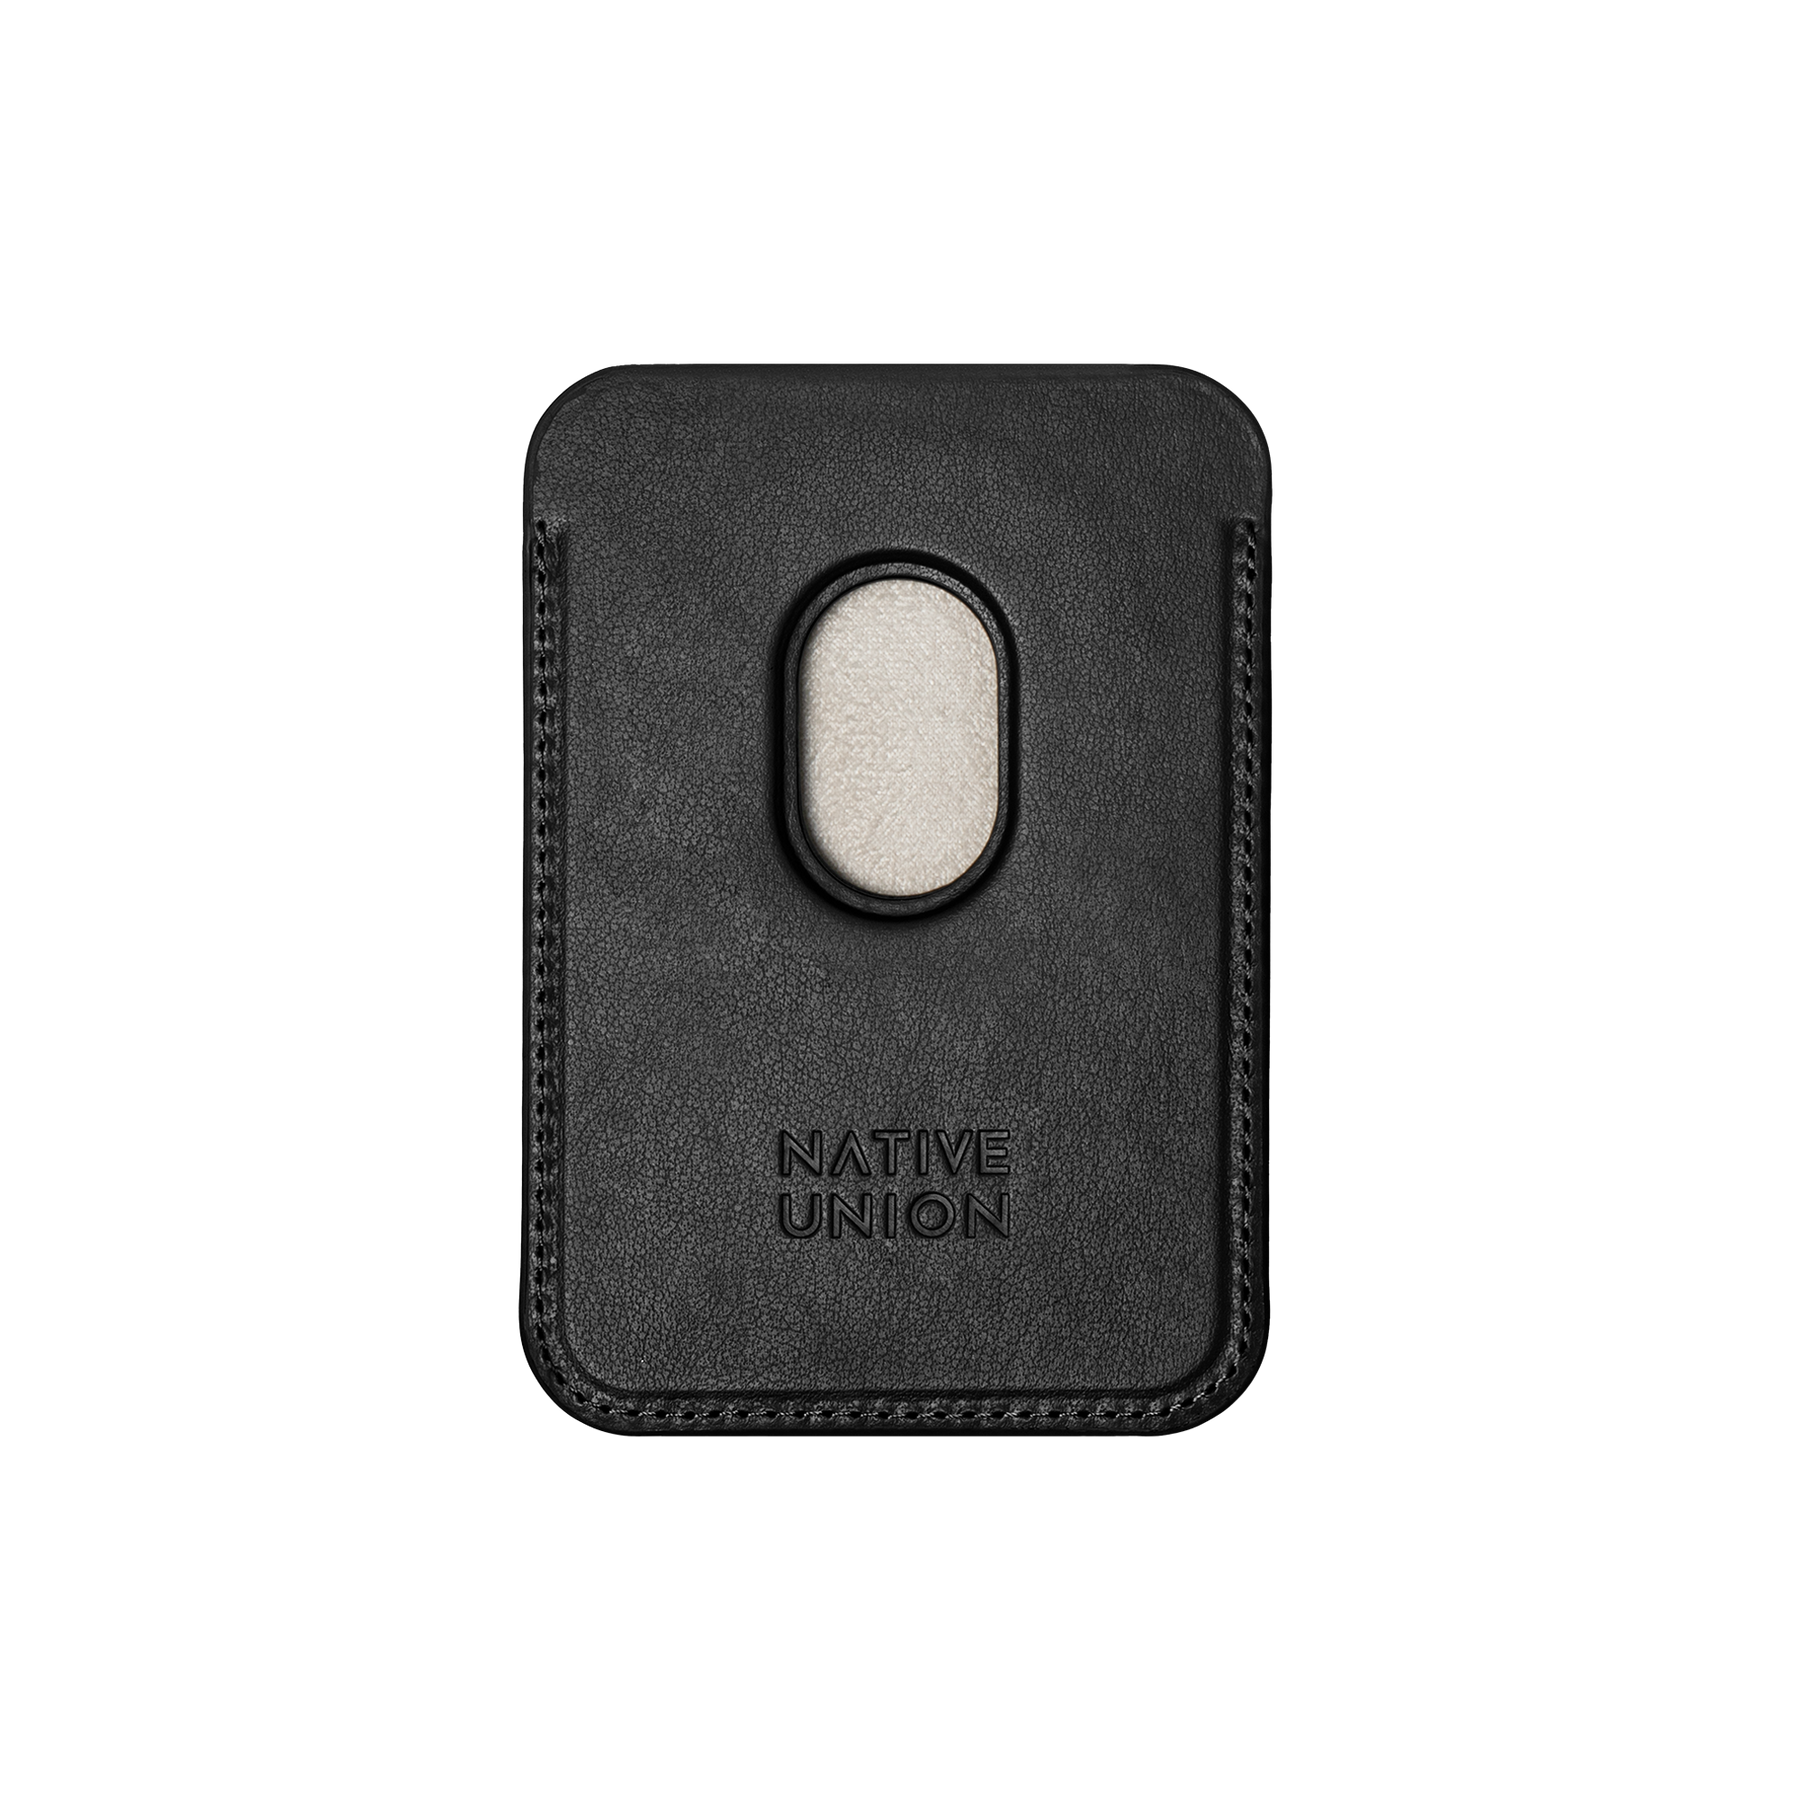 Designer Leather Card Holder Handcrafted From Premium Italian 